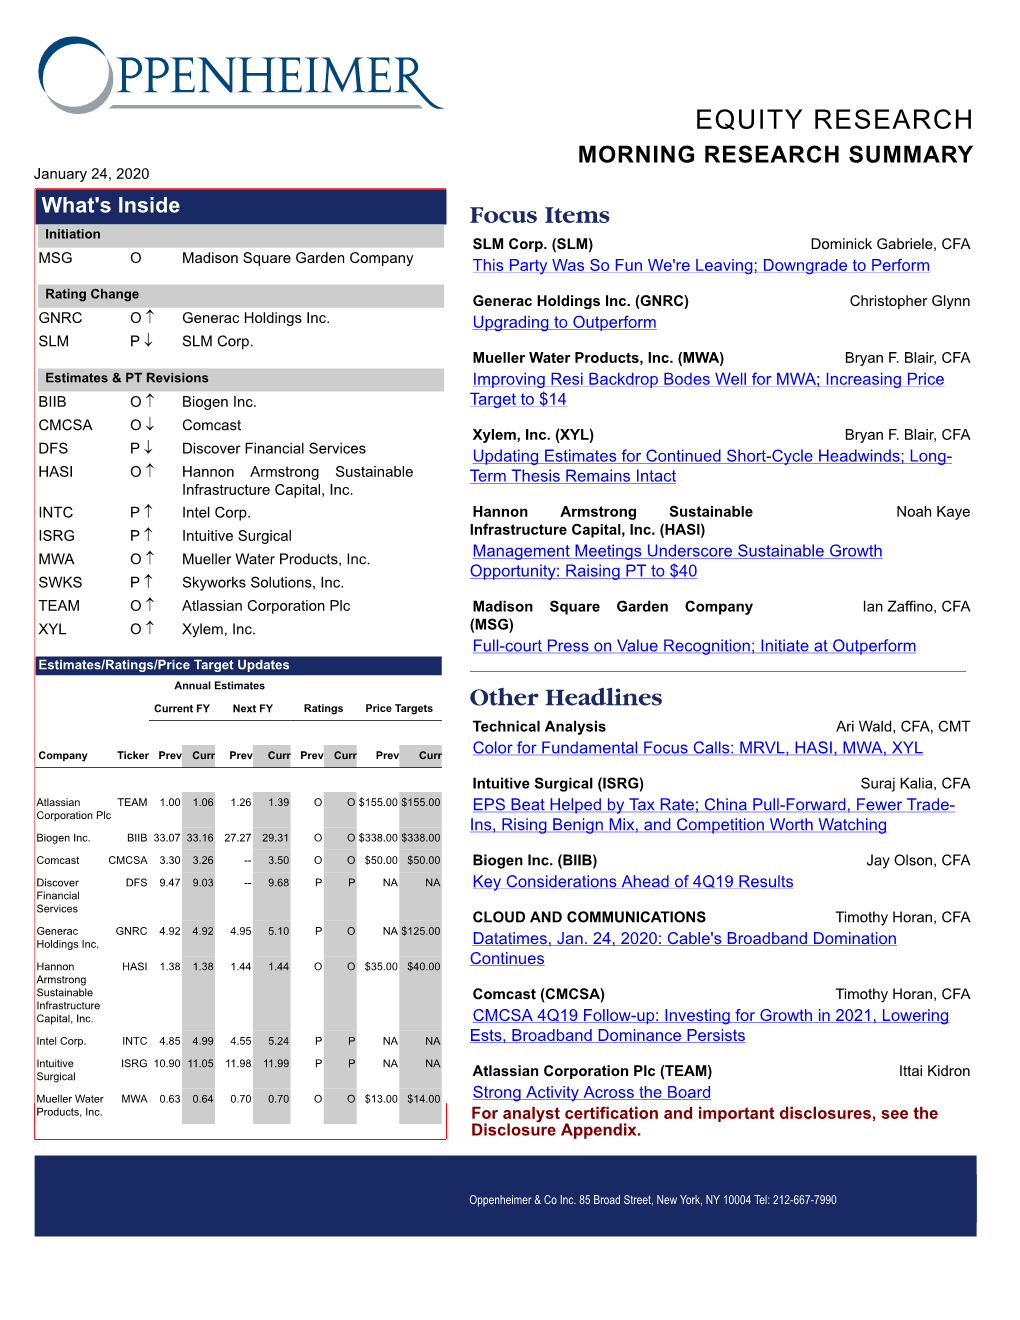 EQUITY RESEARCH MORNING RESEARCH SUMMARY January 24, 2020